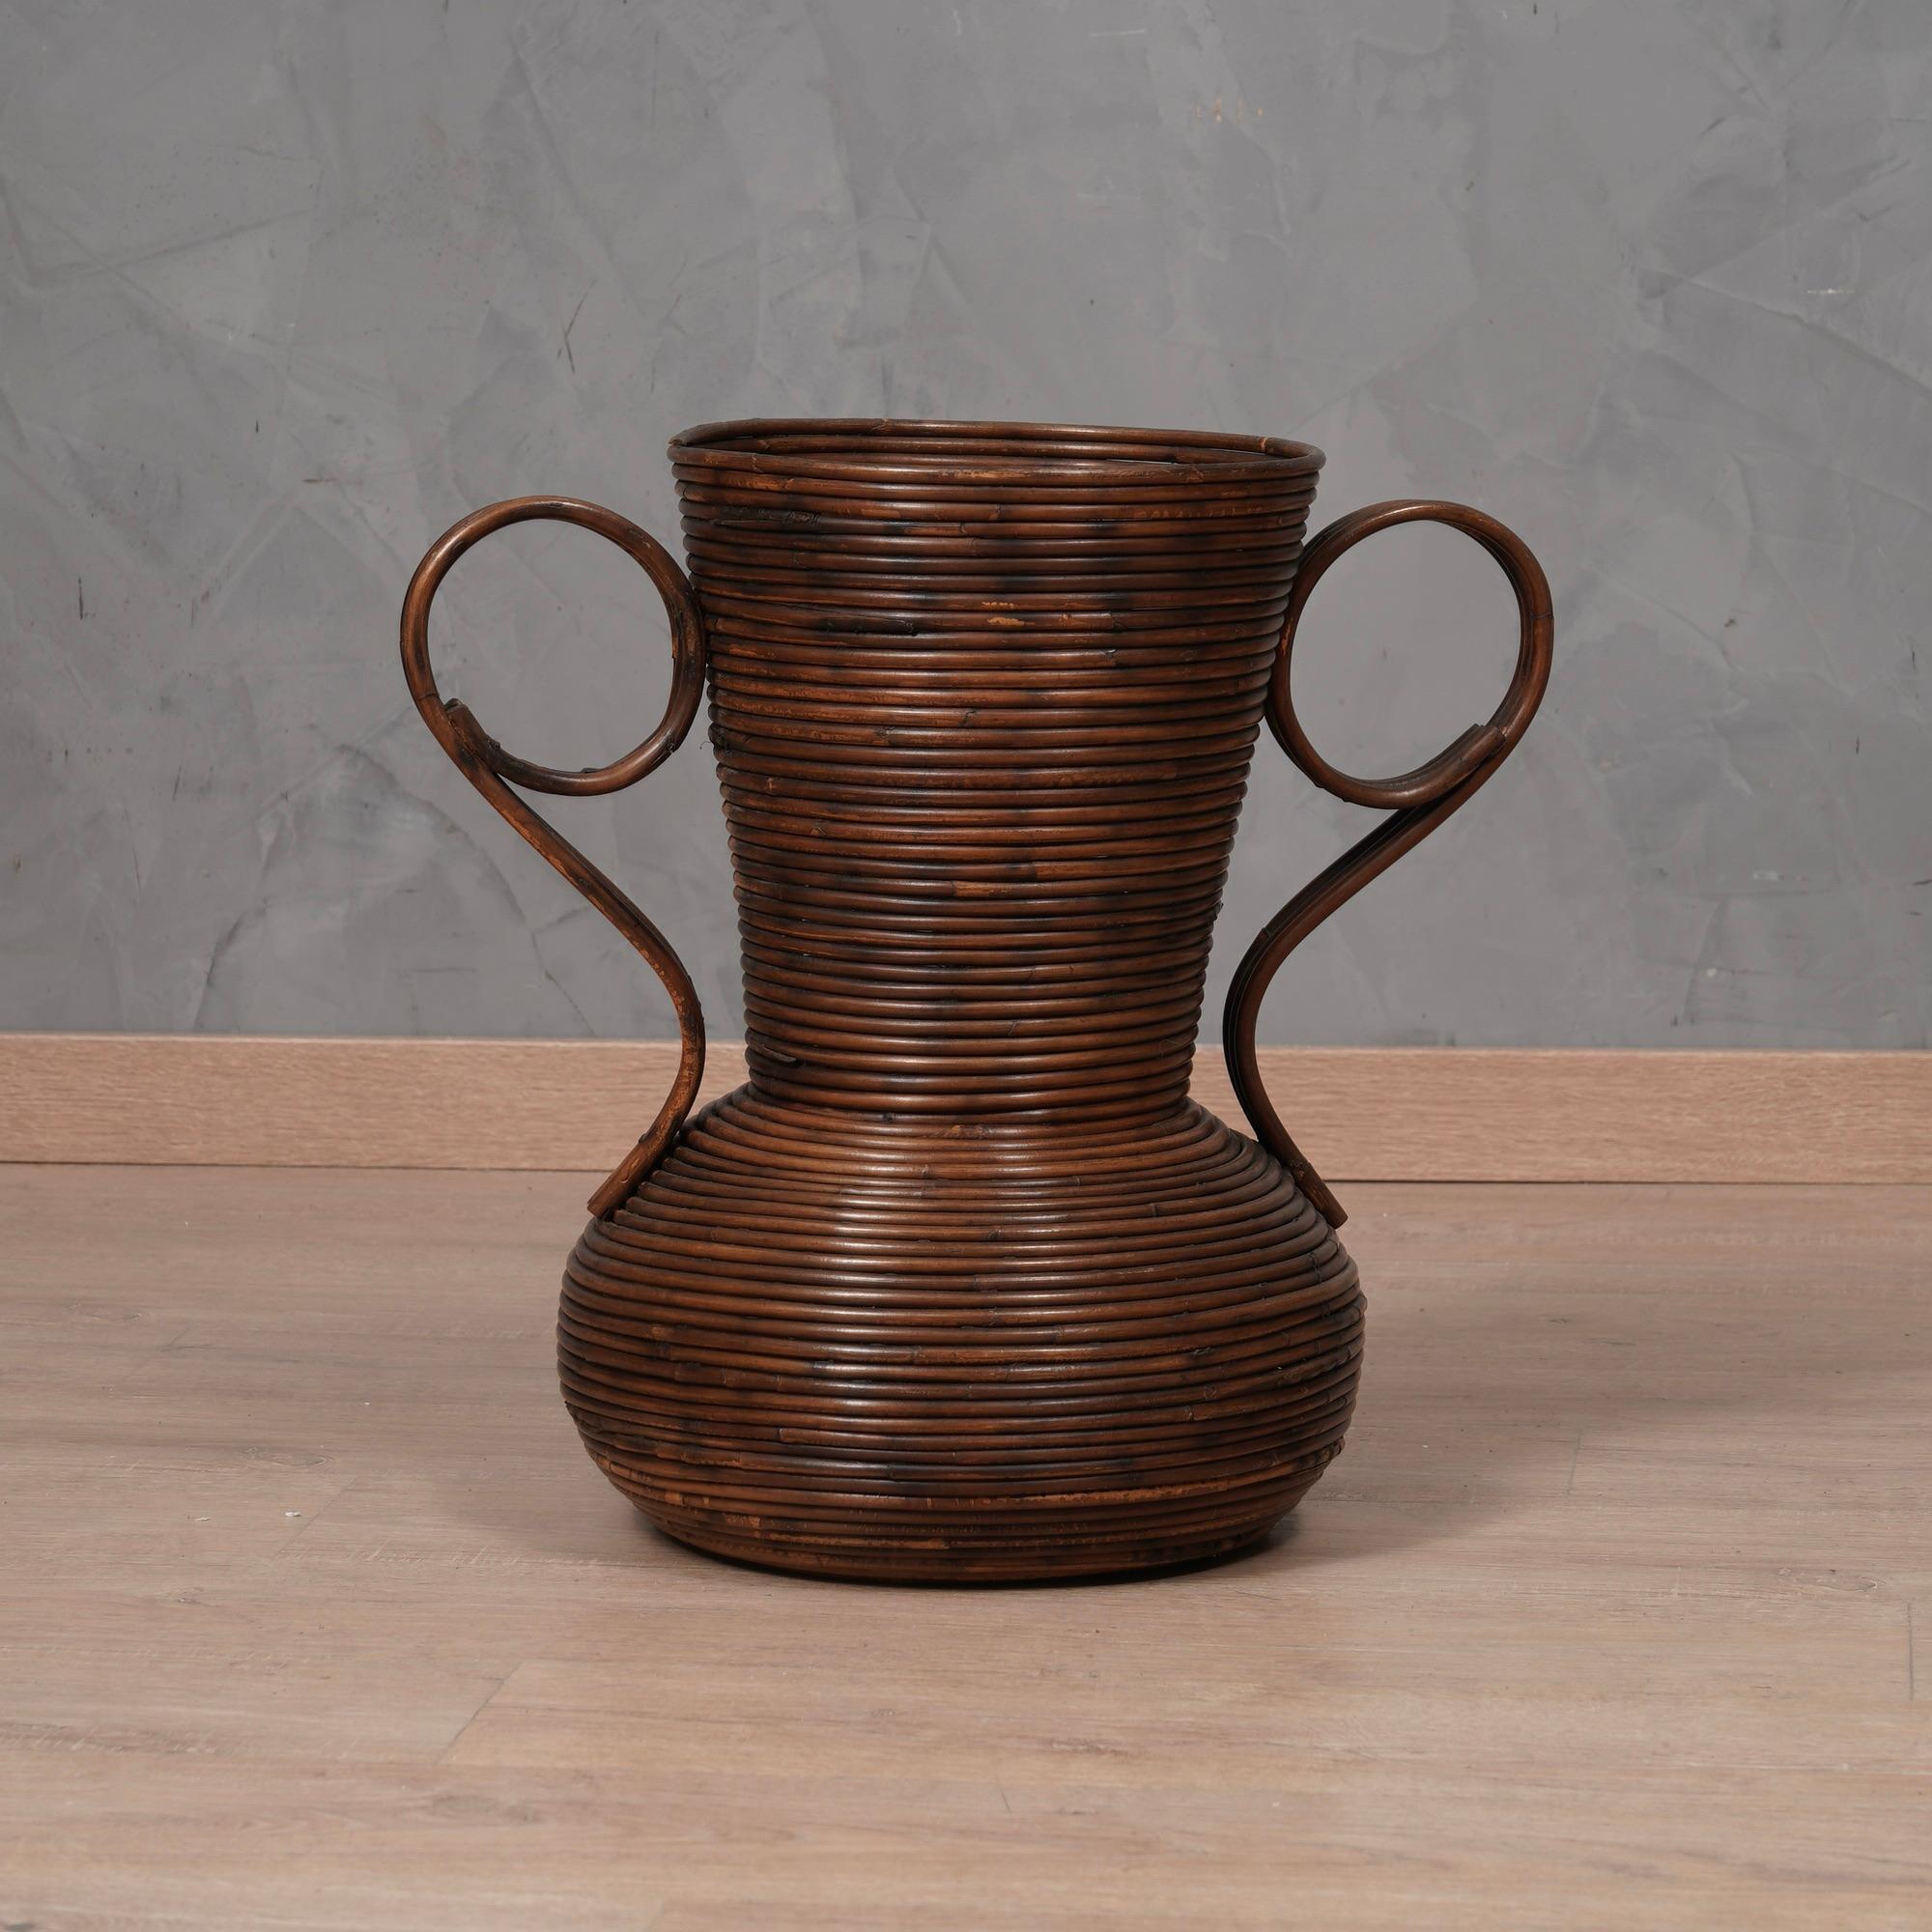 Elegance and refinement are the objective of these amphora vases for the 